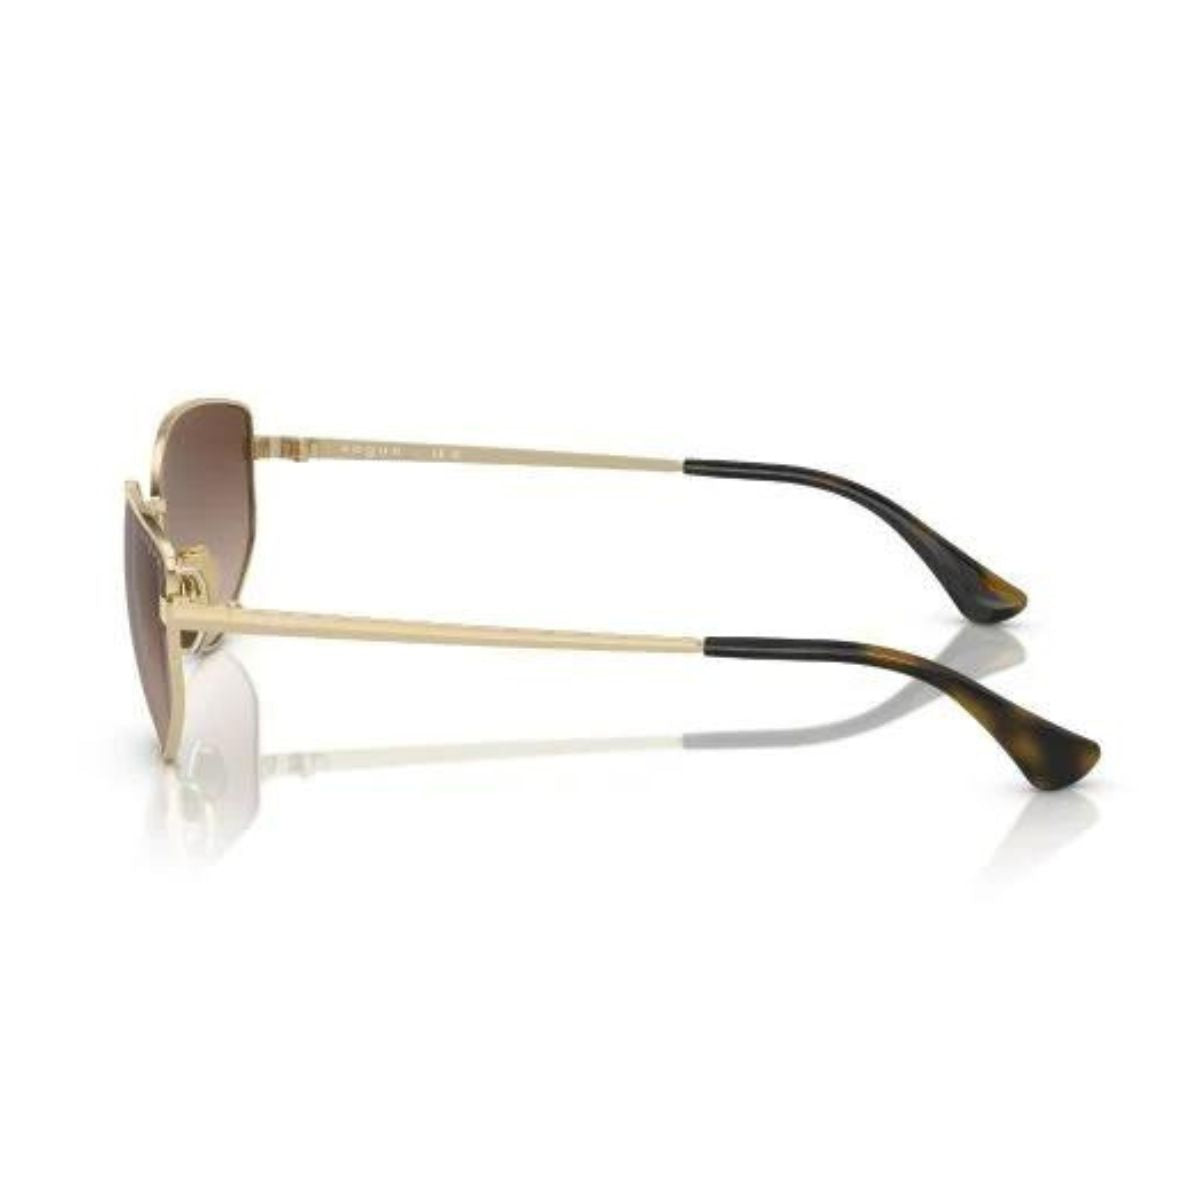 "Women's Vogue sunglasses with gold metal frames"